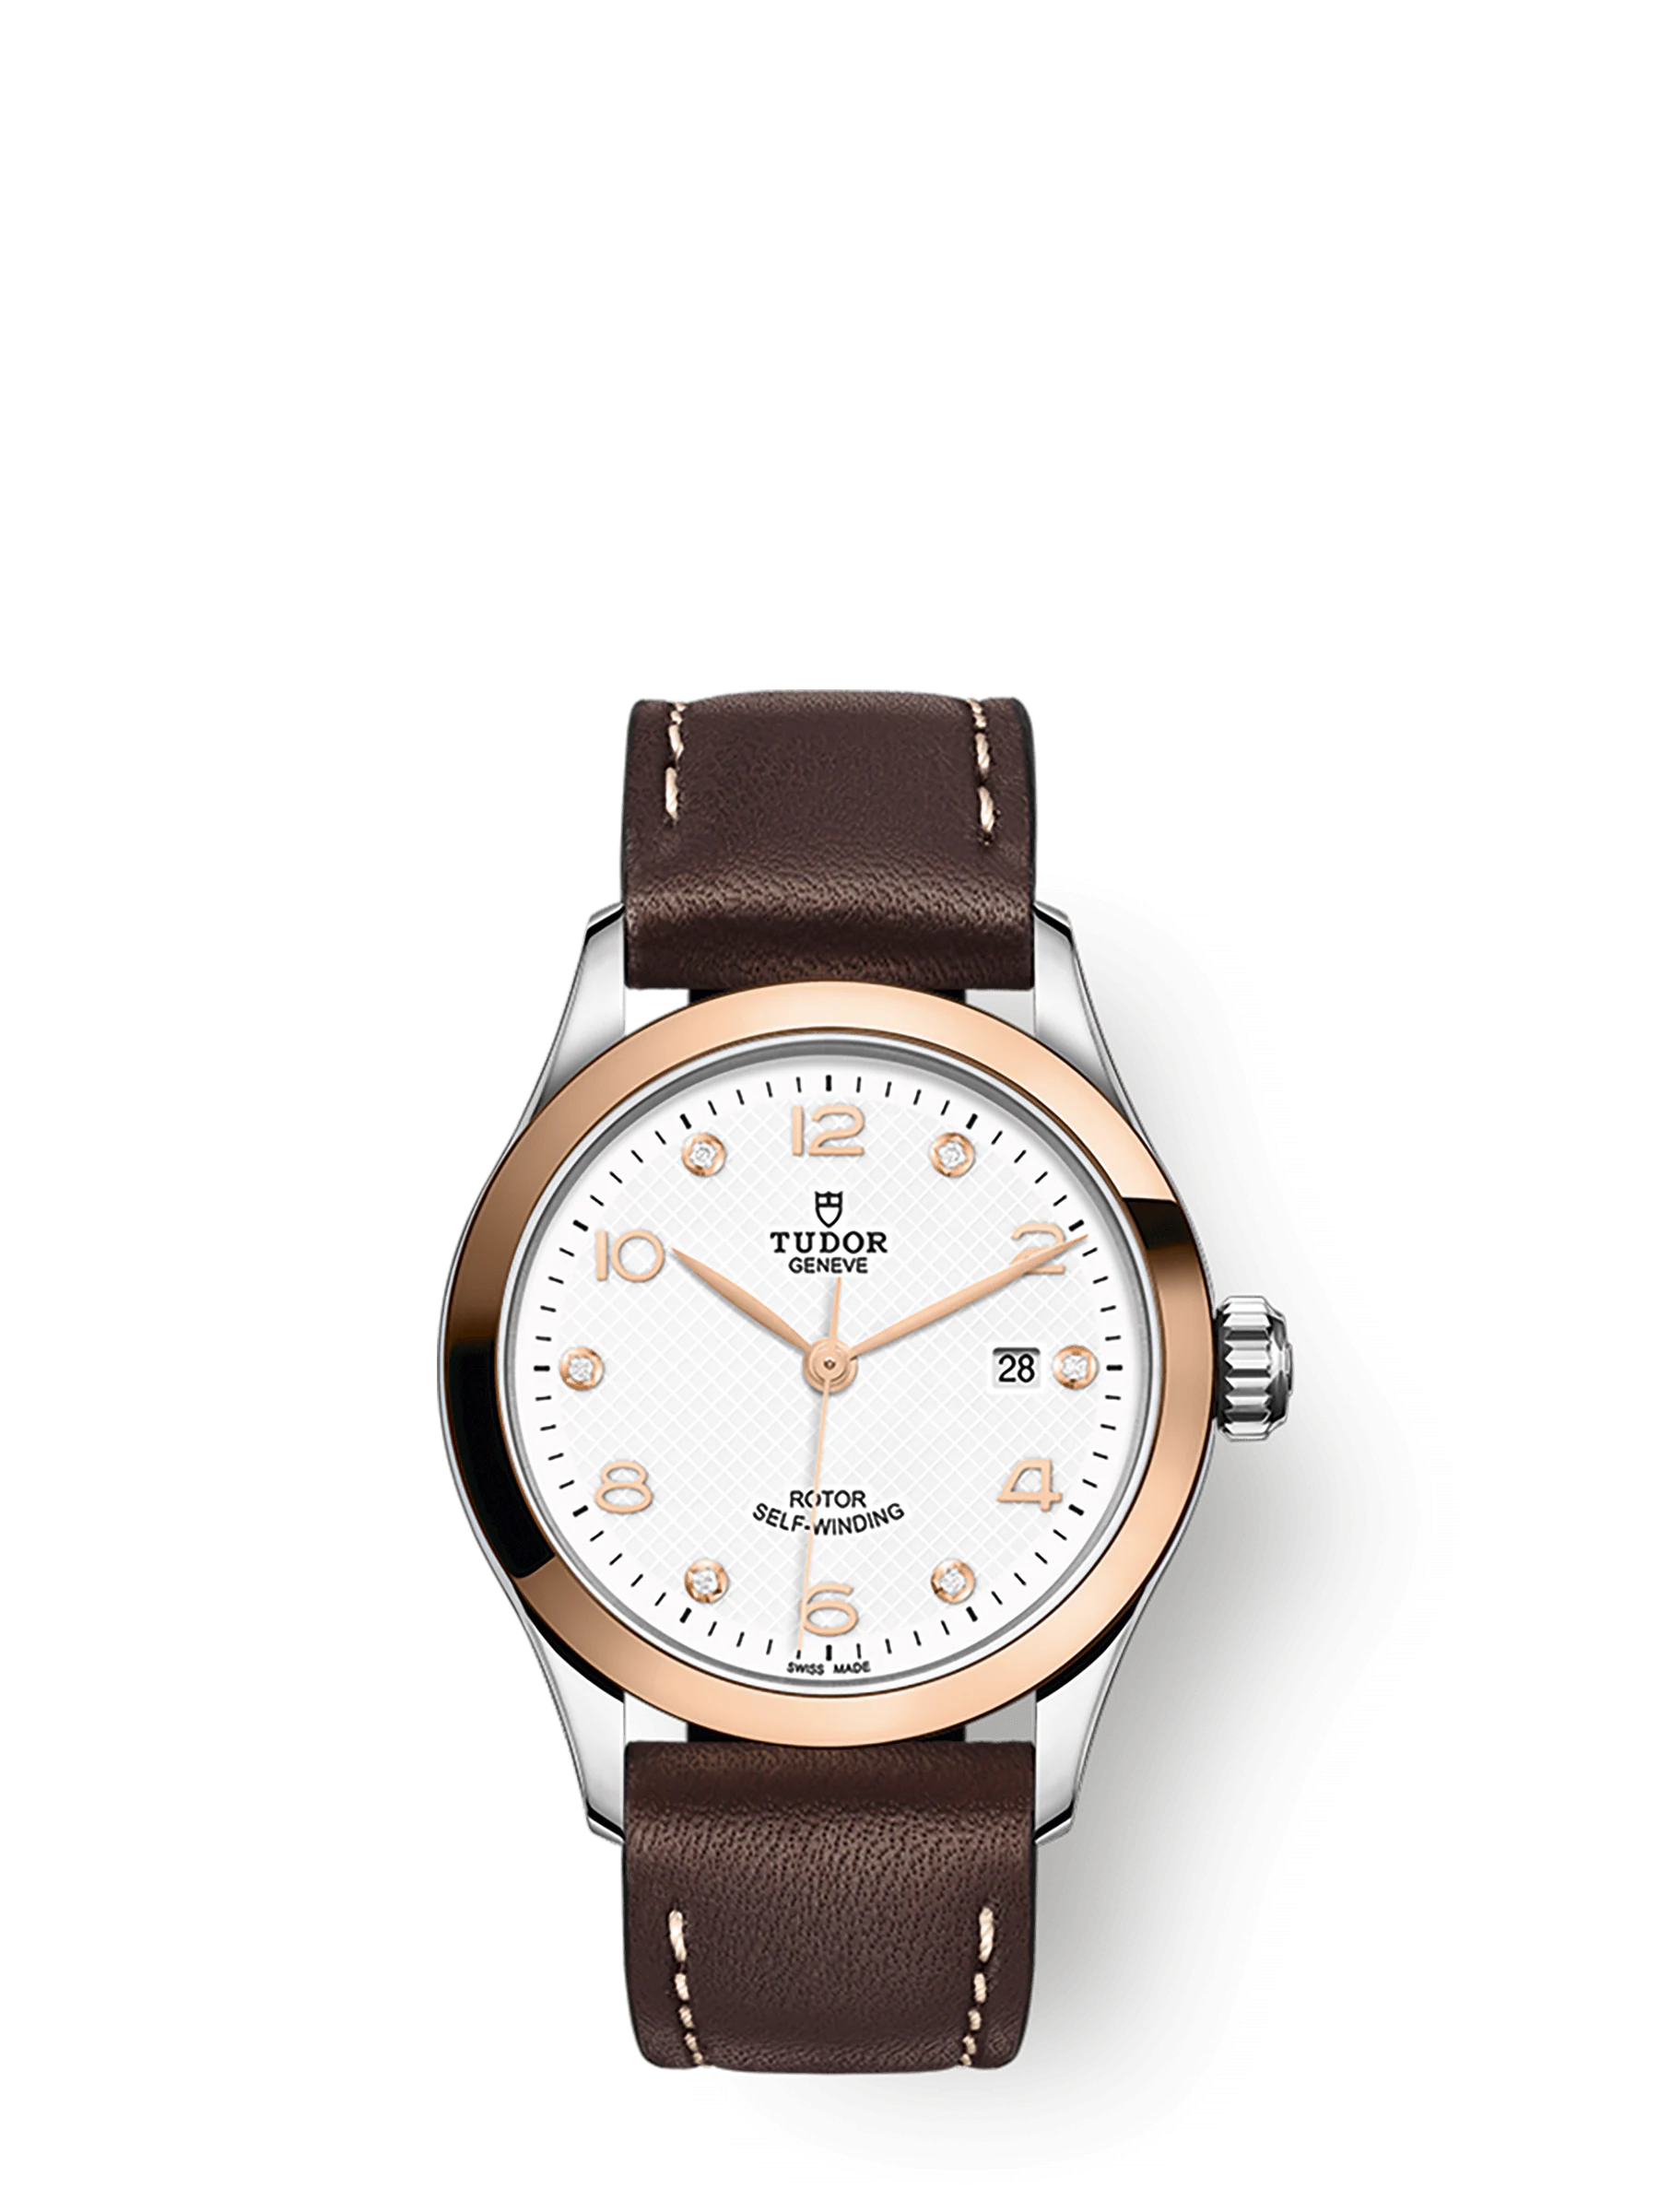 Tudor 1926, Stainless Steel and 18k Rose Gold with Diamond-set, 28mm, Ref# M91351-0012